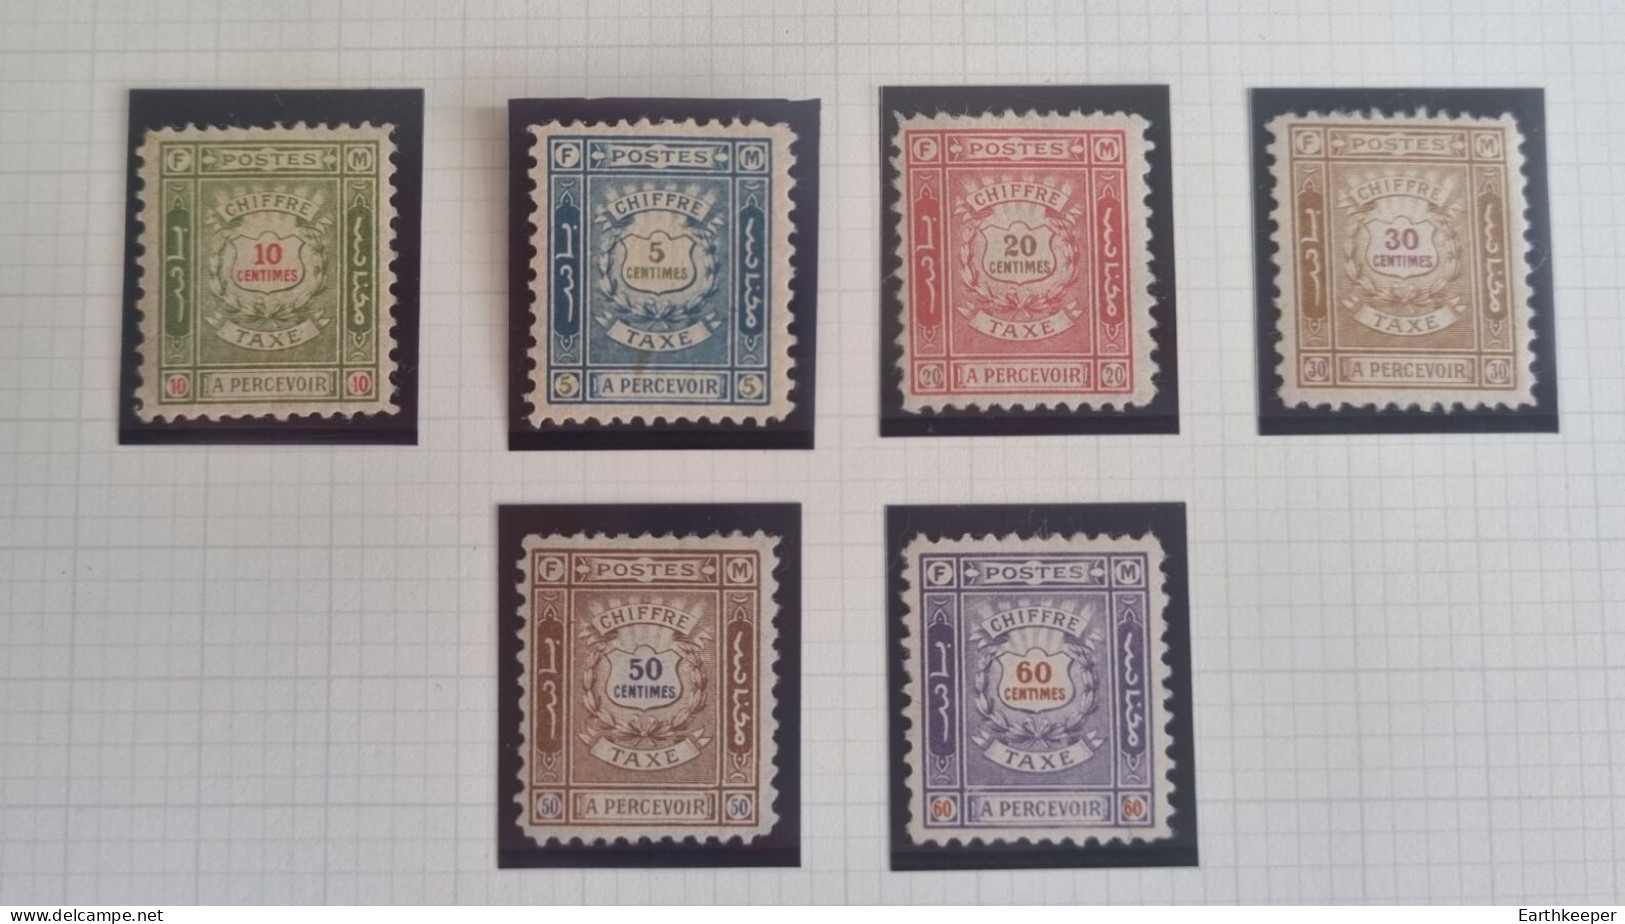 6 TIMBRES TAXE MAROC POSTE LOCALE 1898 (XX & CACHET) FEZ MEKNES - Locals & Carriers